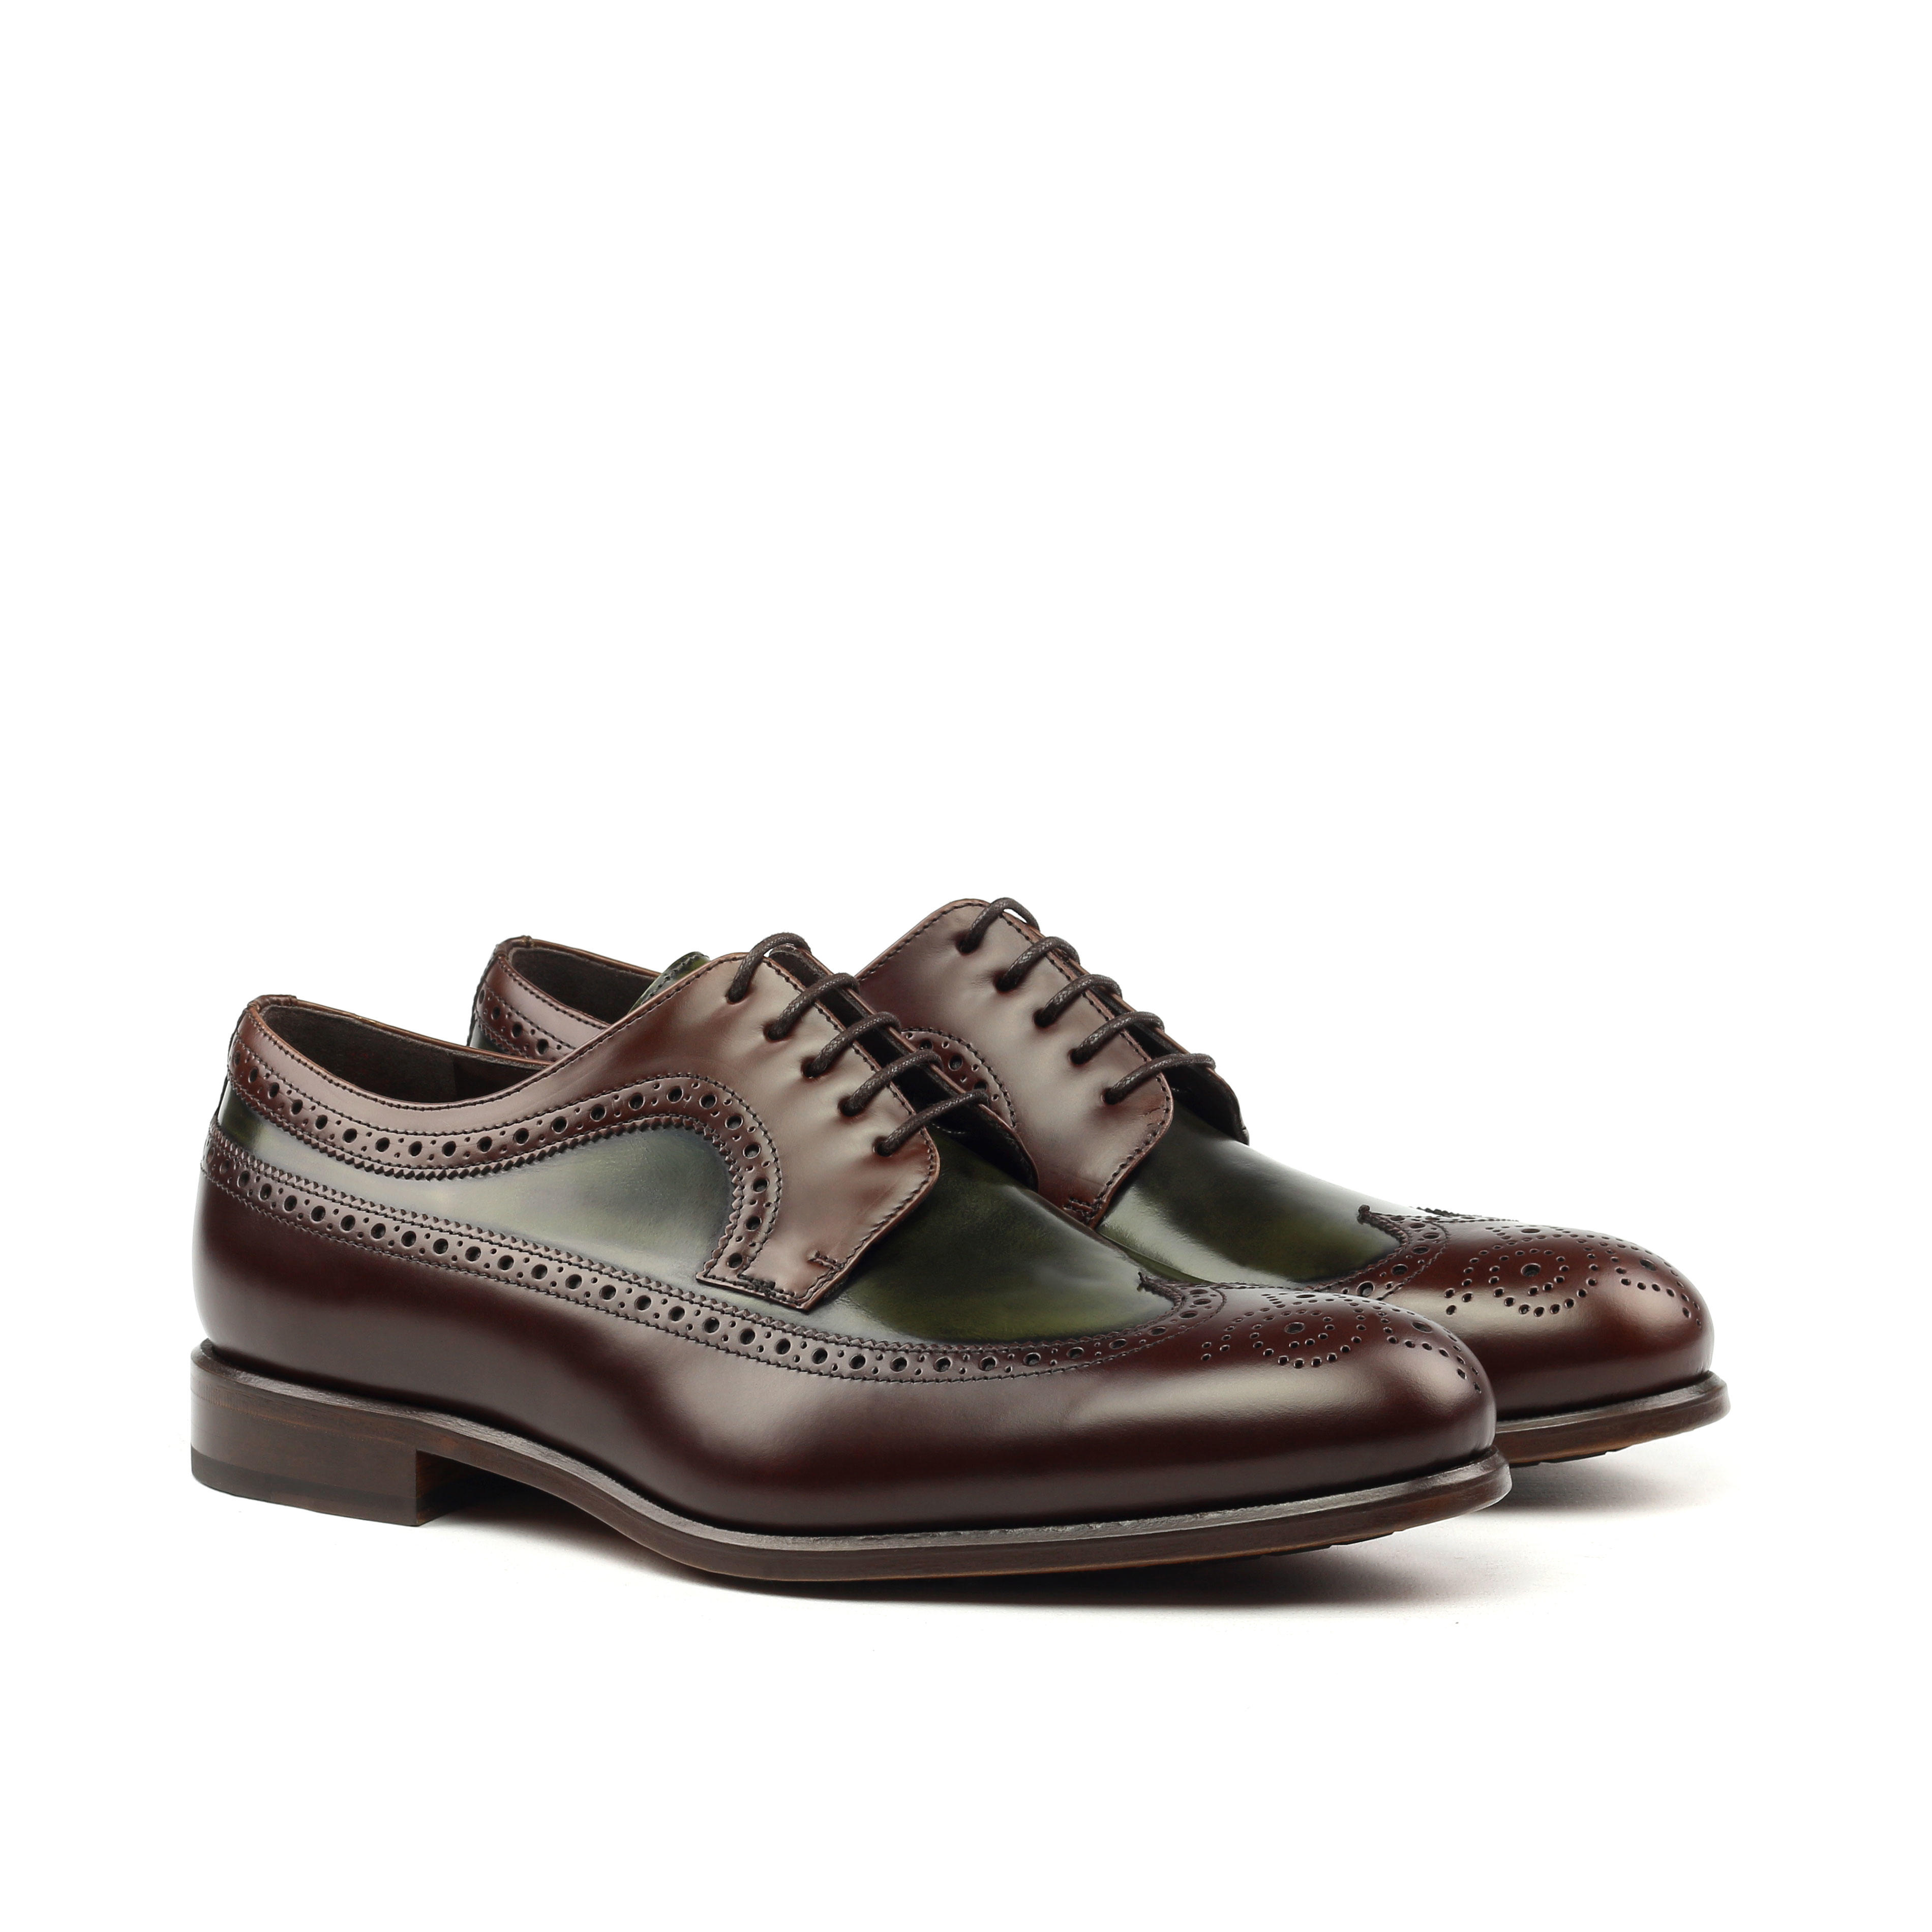 Manor of London 'The Blucher' Oxblood & Green Polished Calfskin Shoe Luxury Lace Up Custom Initials Front Side View